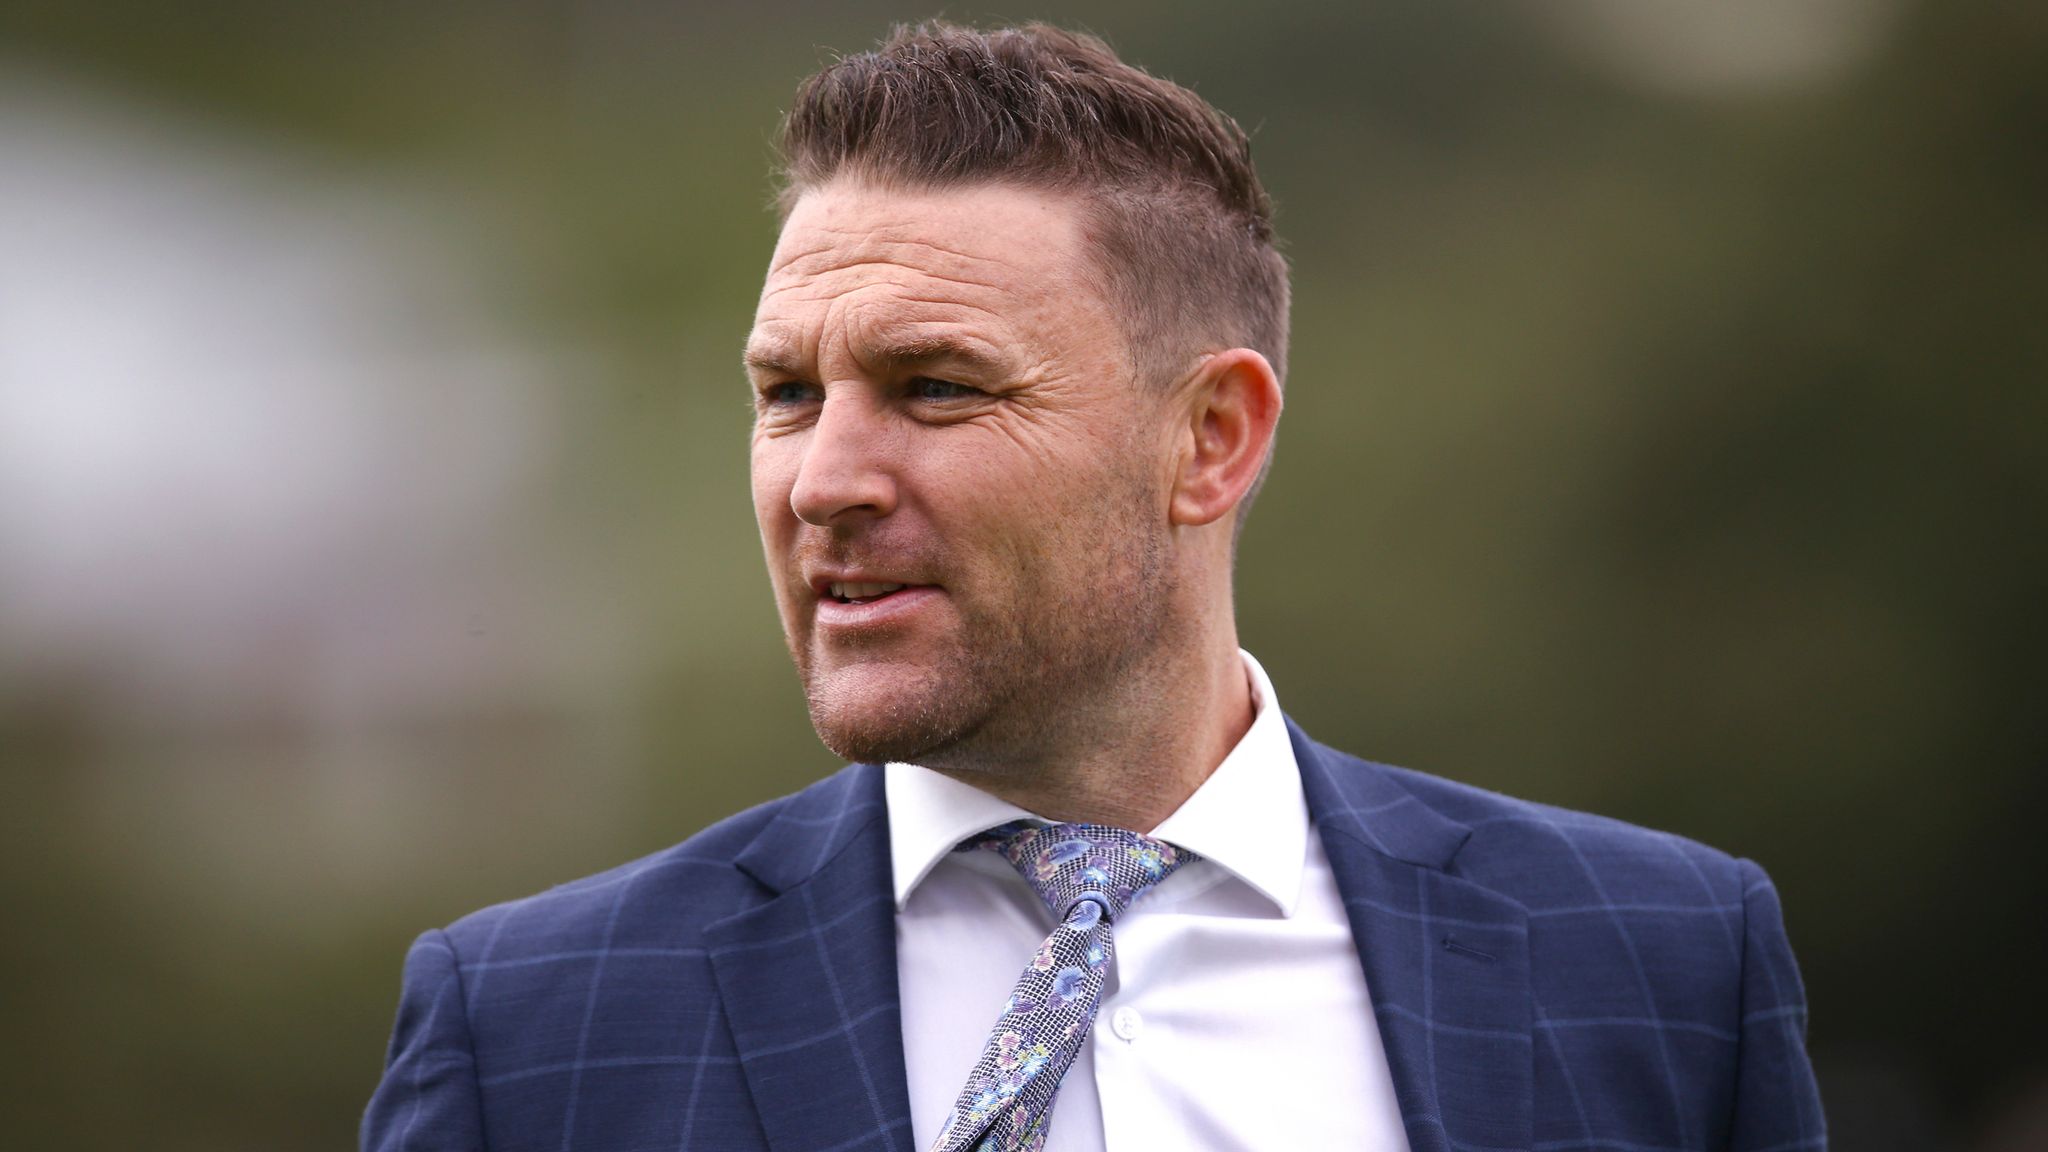 England Need To Play Attractive Brand Of Cricket If Test Cricket Has To Thrive – Brendon McCullum